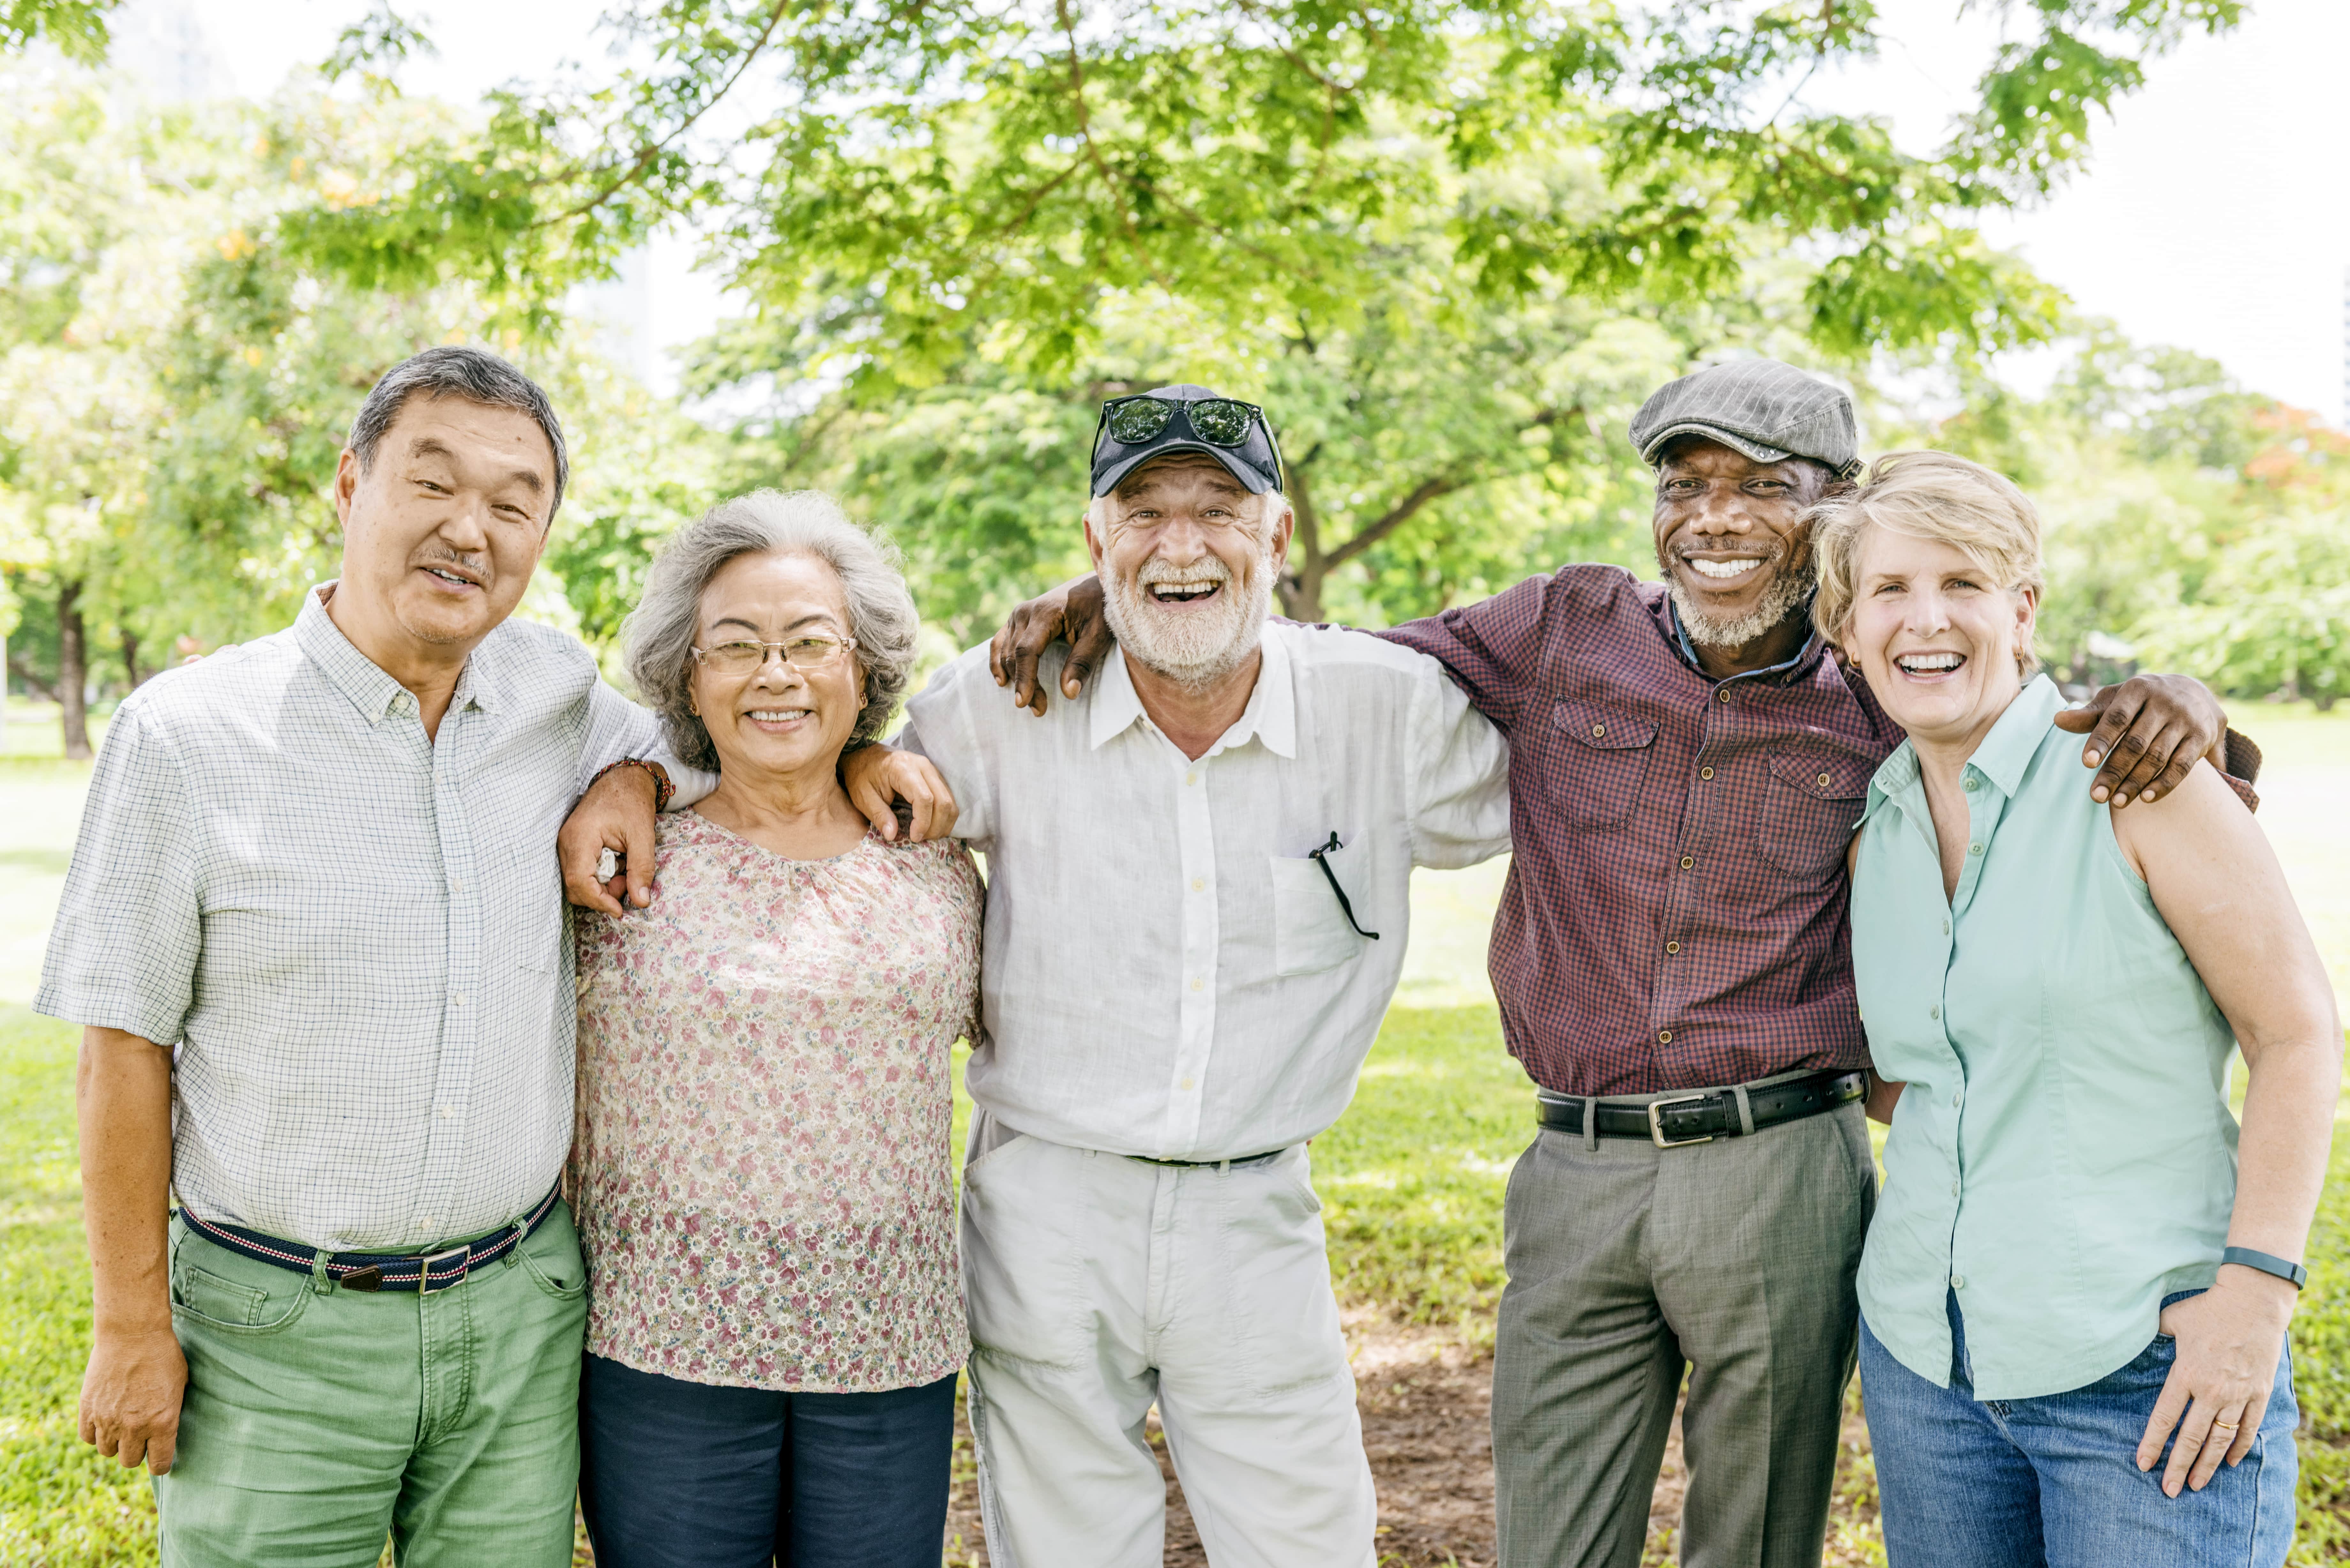 Older Americans Act programs work together to keep older adults healthy, independent and engaged within their communities. 